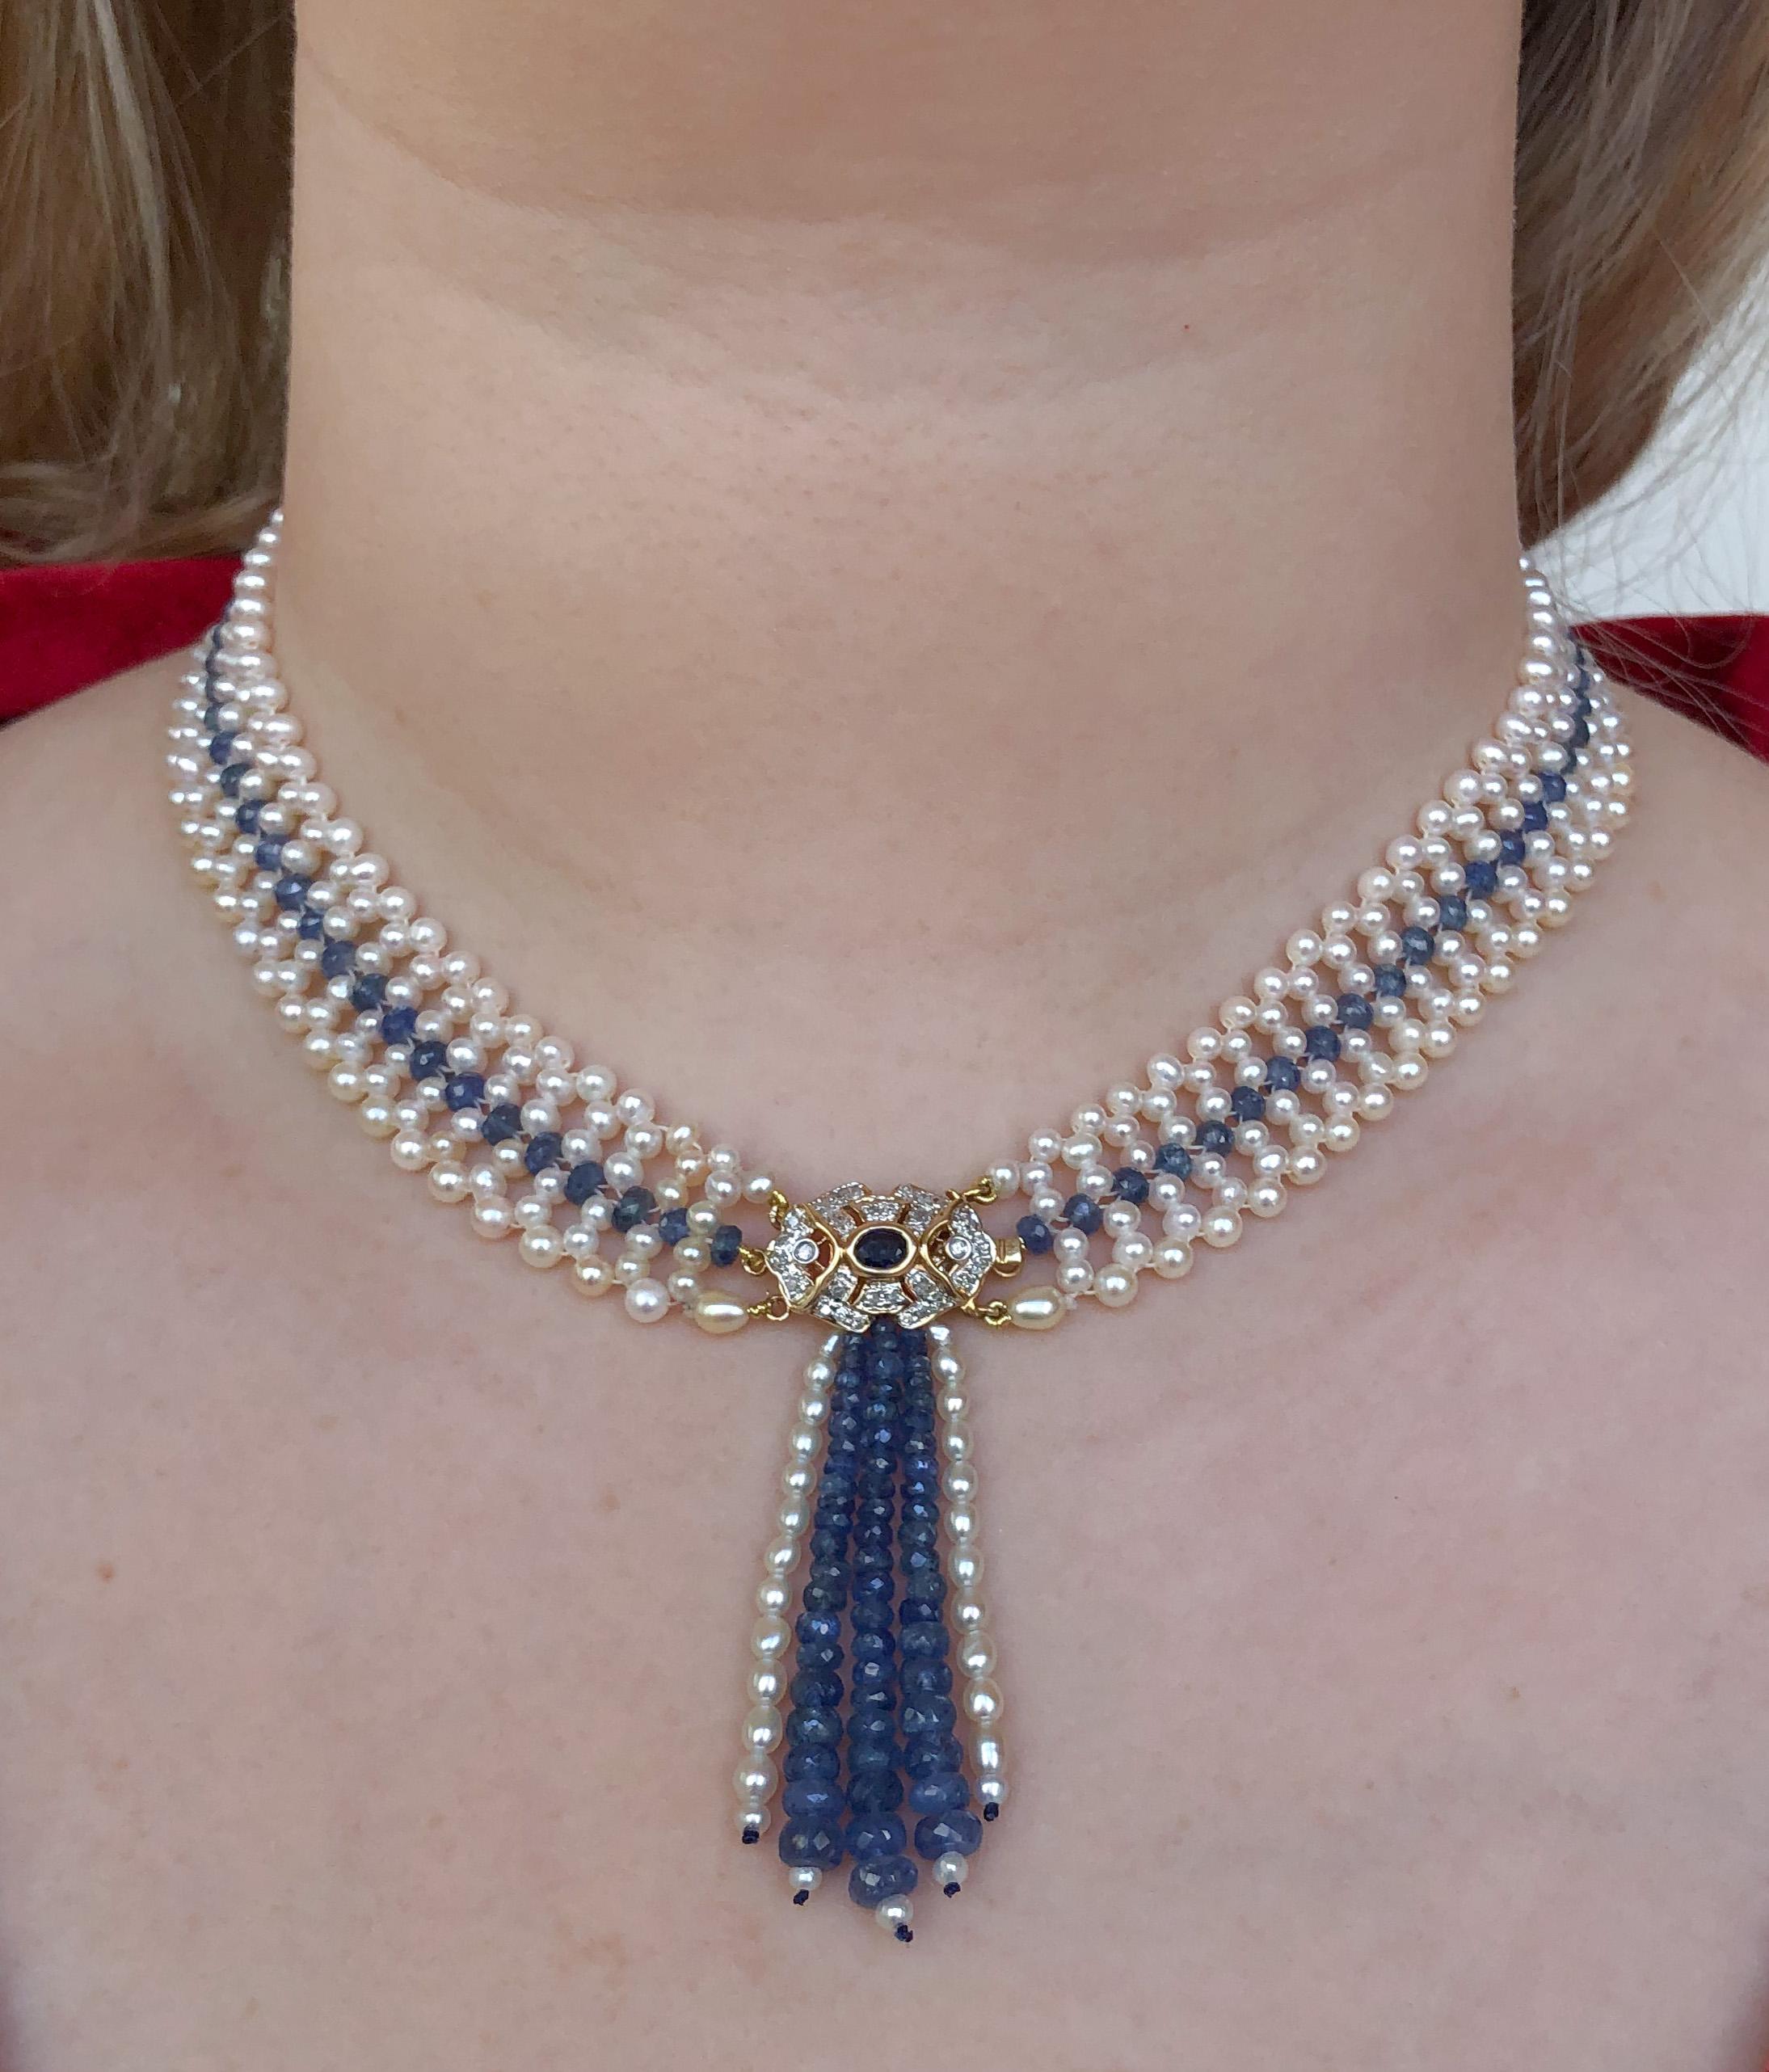 Marina J. Woven Pearl and Sapphire Necklace with Diamond Centerpiece & 14K Gold 4